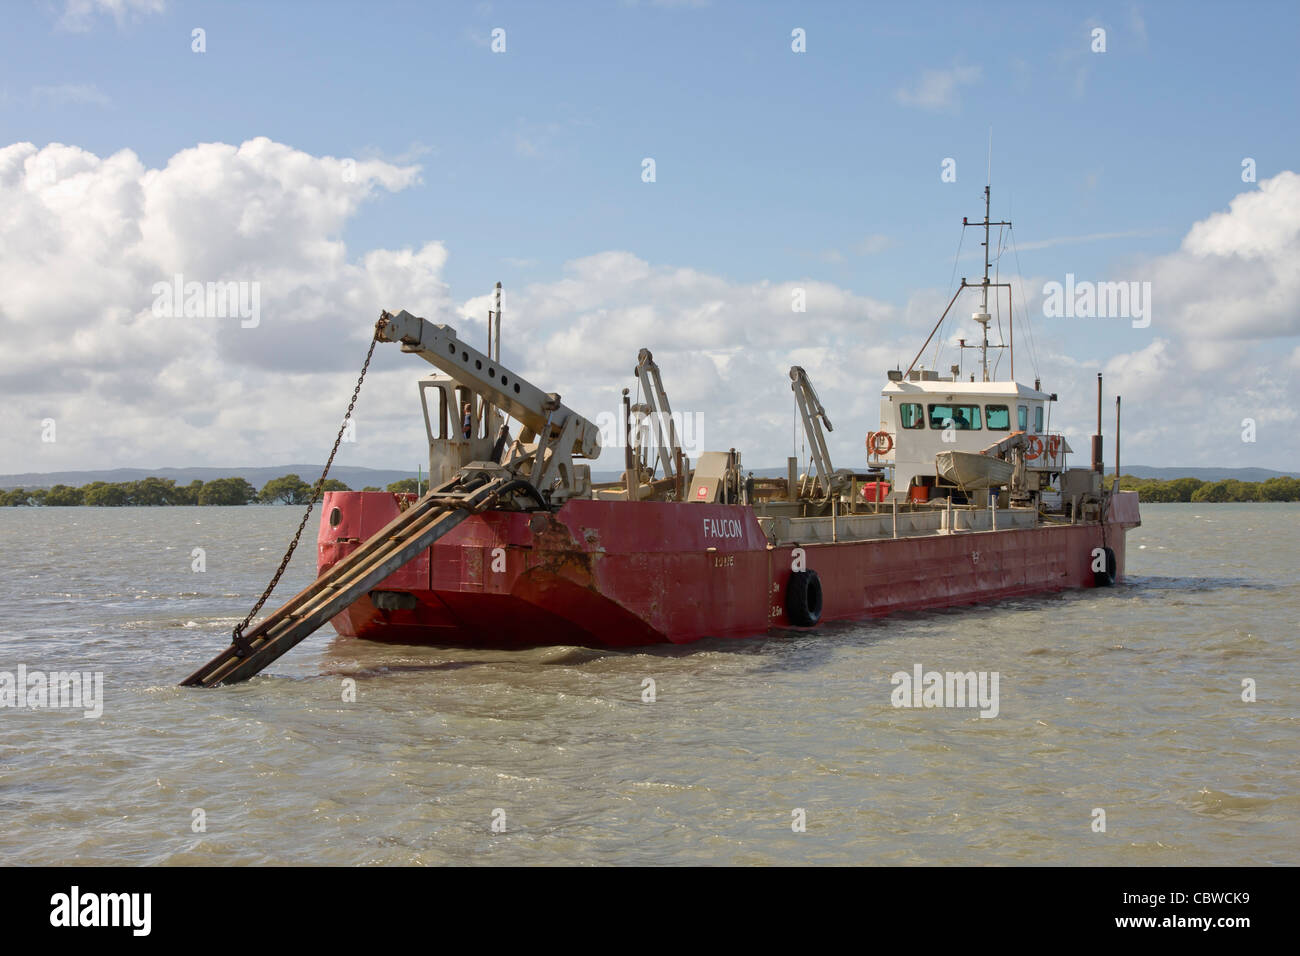 The suction hopper dredger 'Faucon' is used to keep shipping channels clear in Moreton Bay - Brisbane Stock Photo